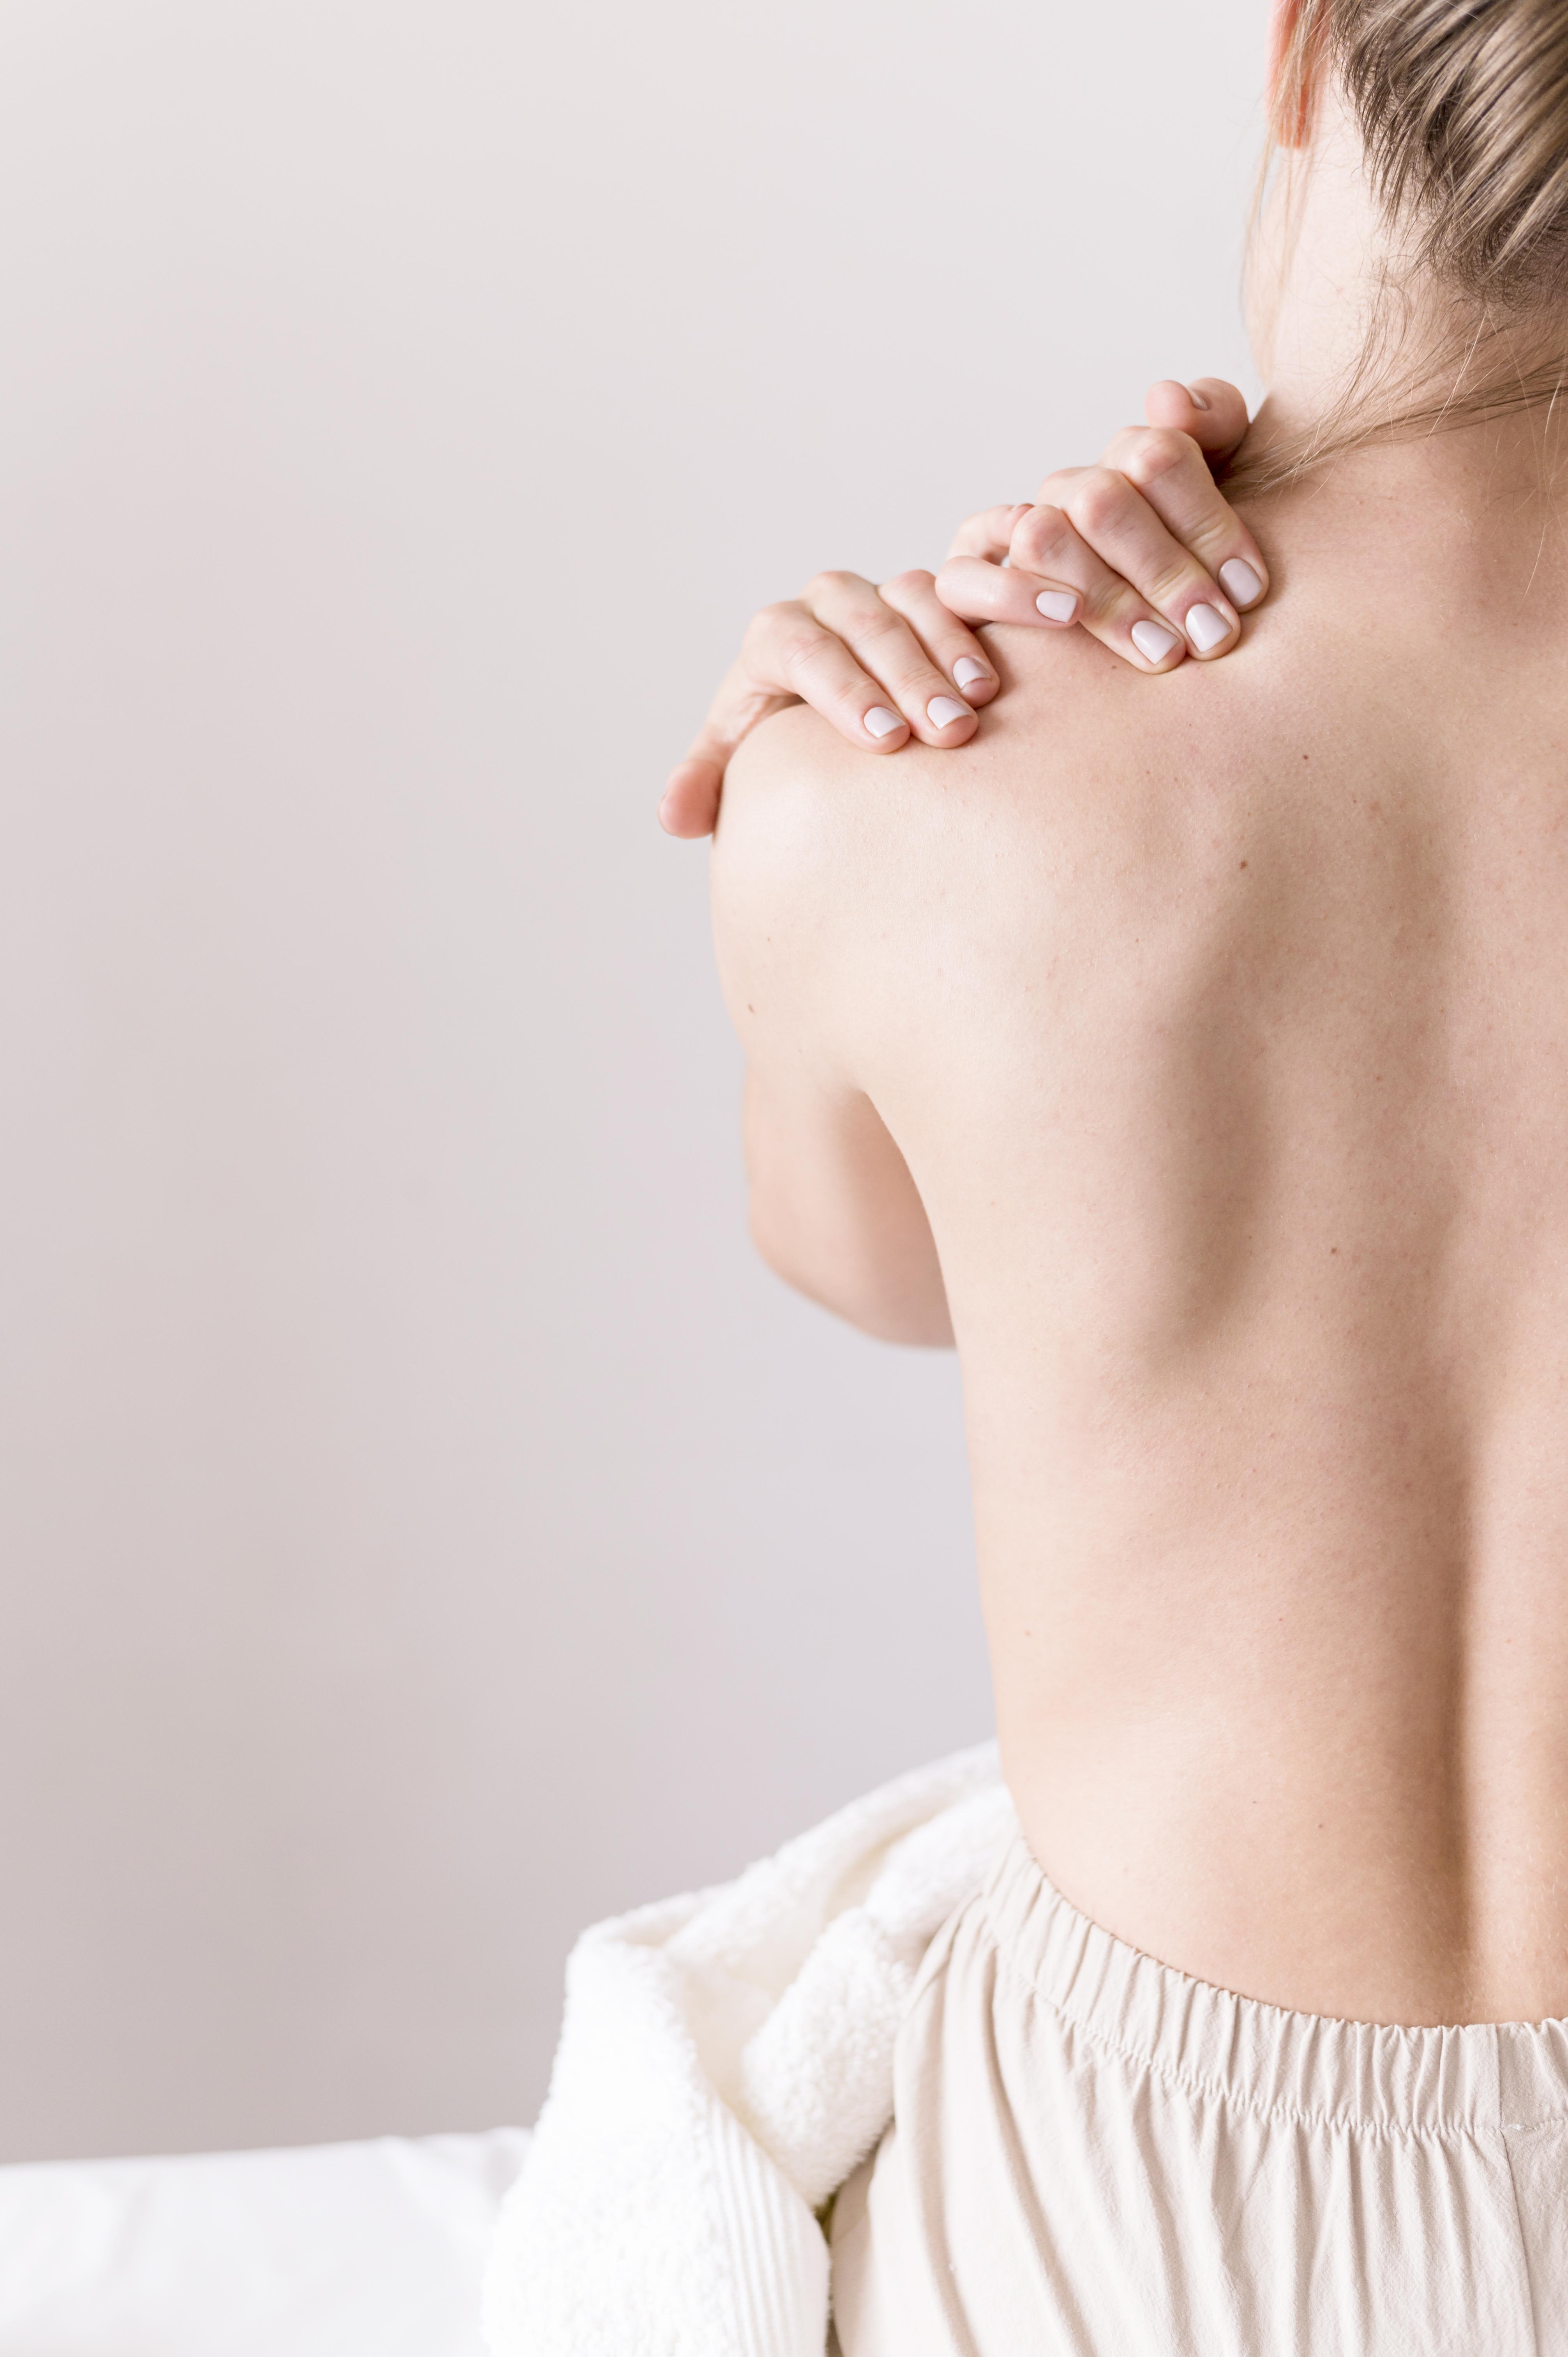 When to Know Your Shoulder Pain is Serious